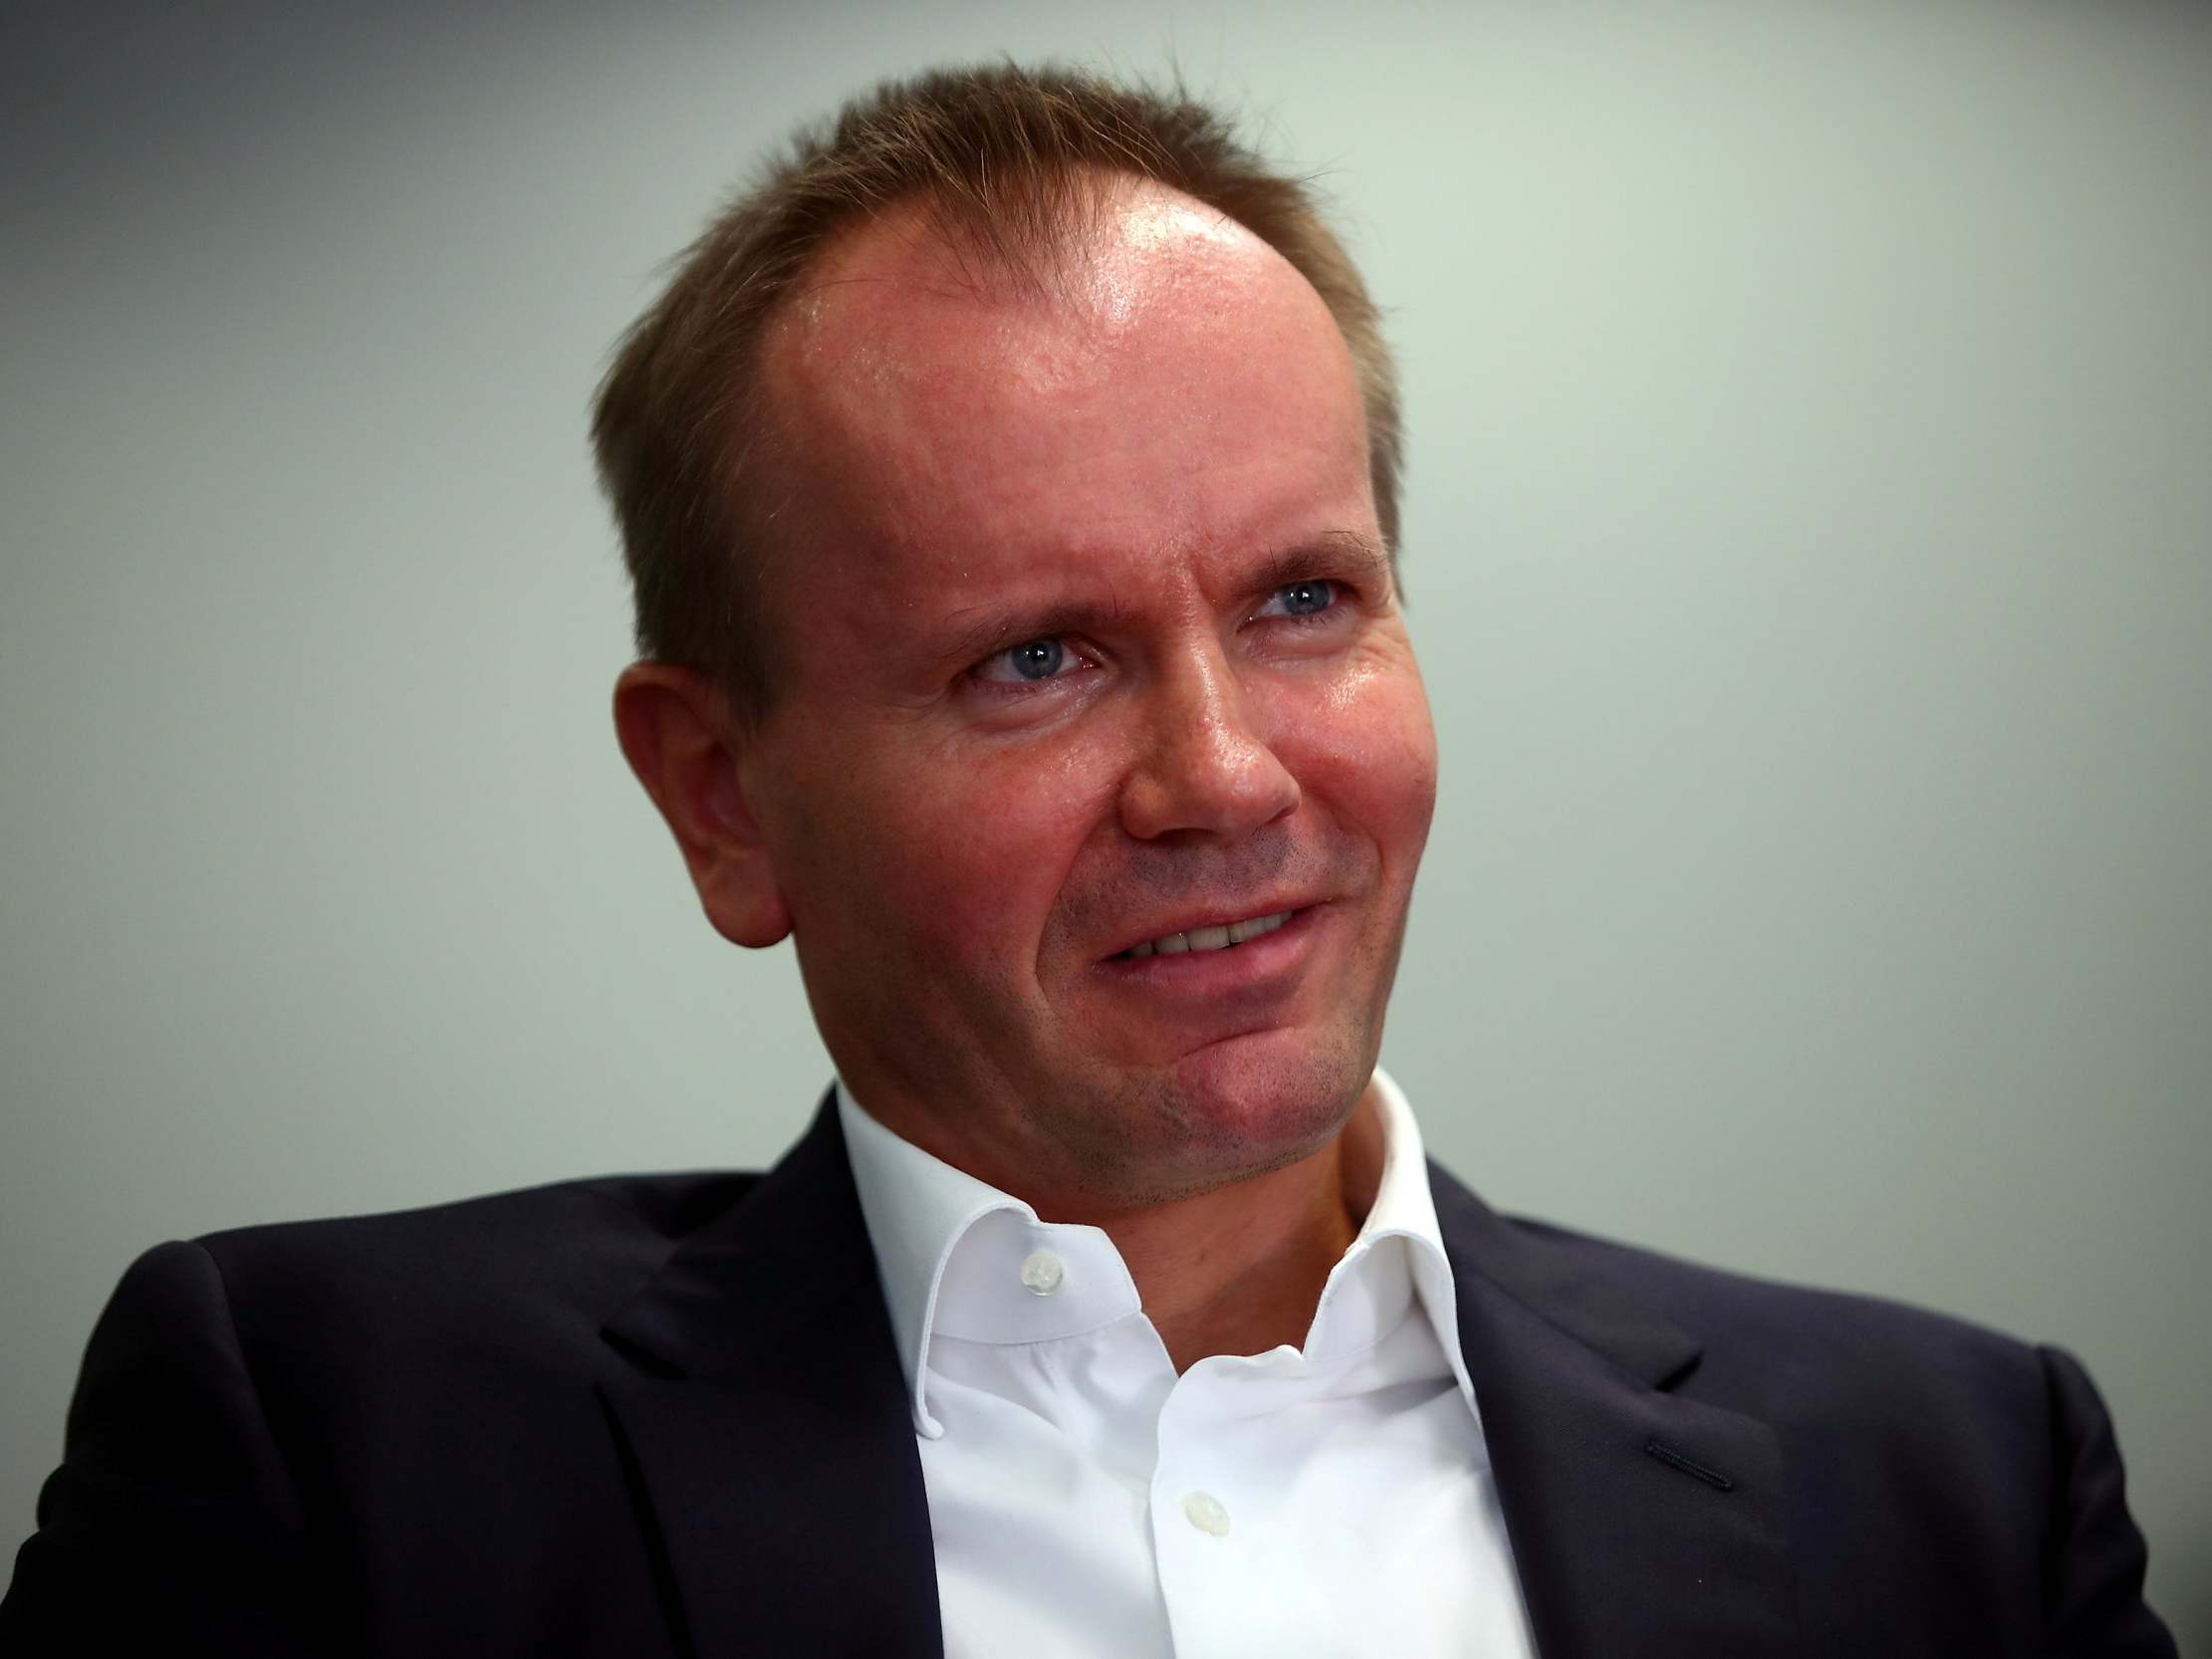 Markus Braun resigned from his role as CEO of Wirecard after an audit